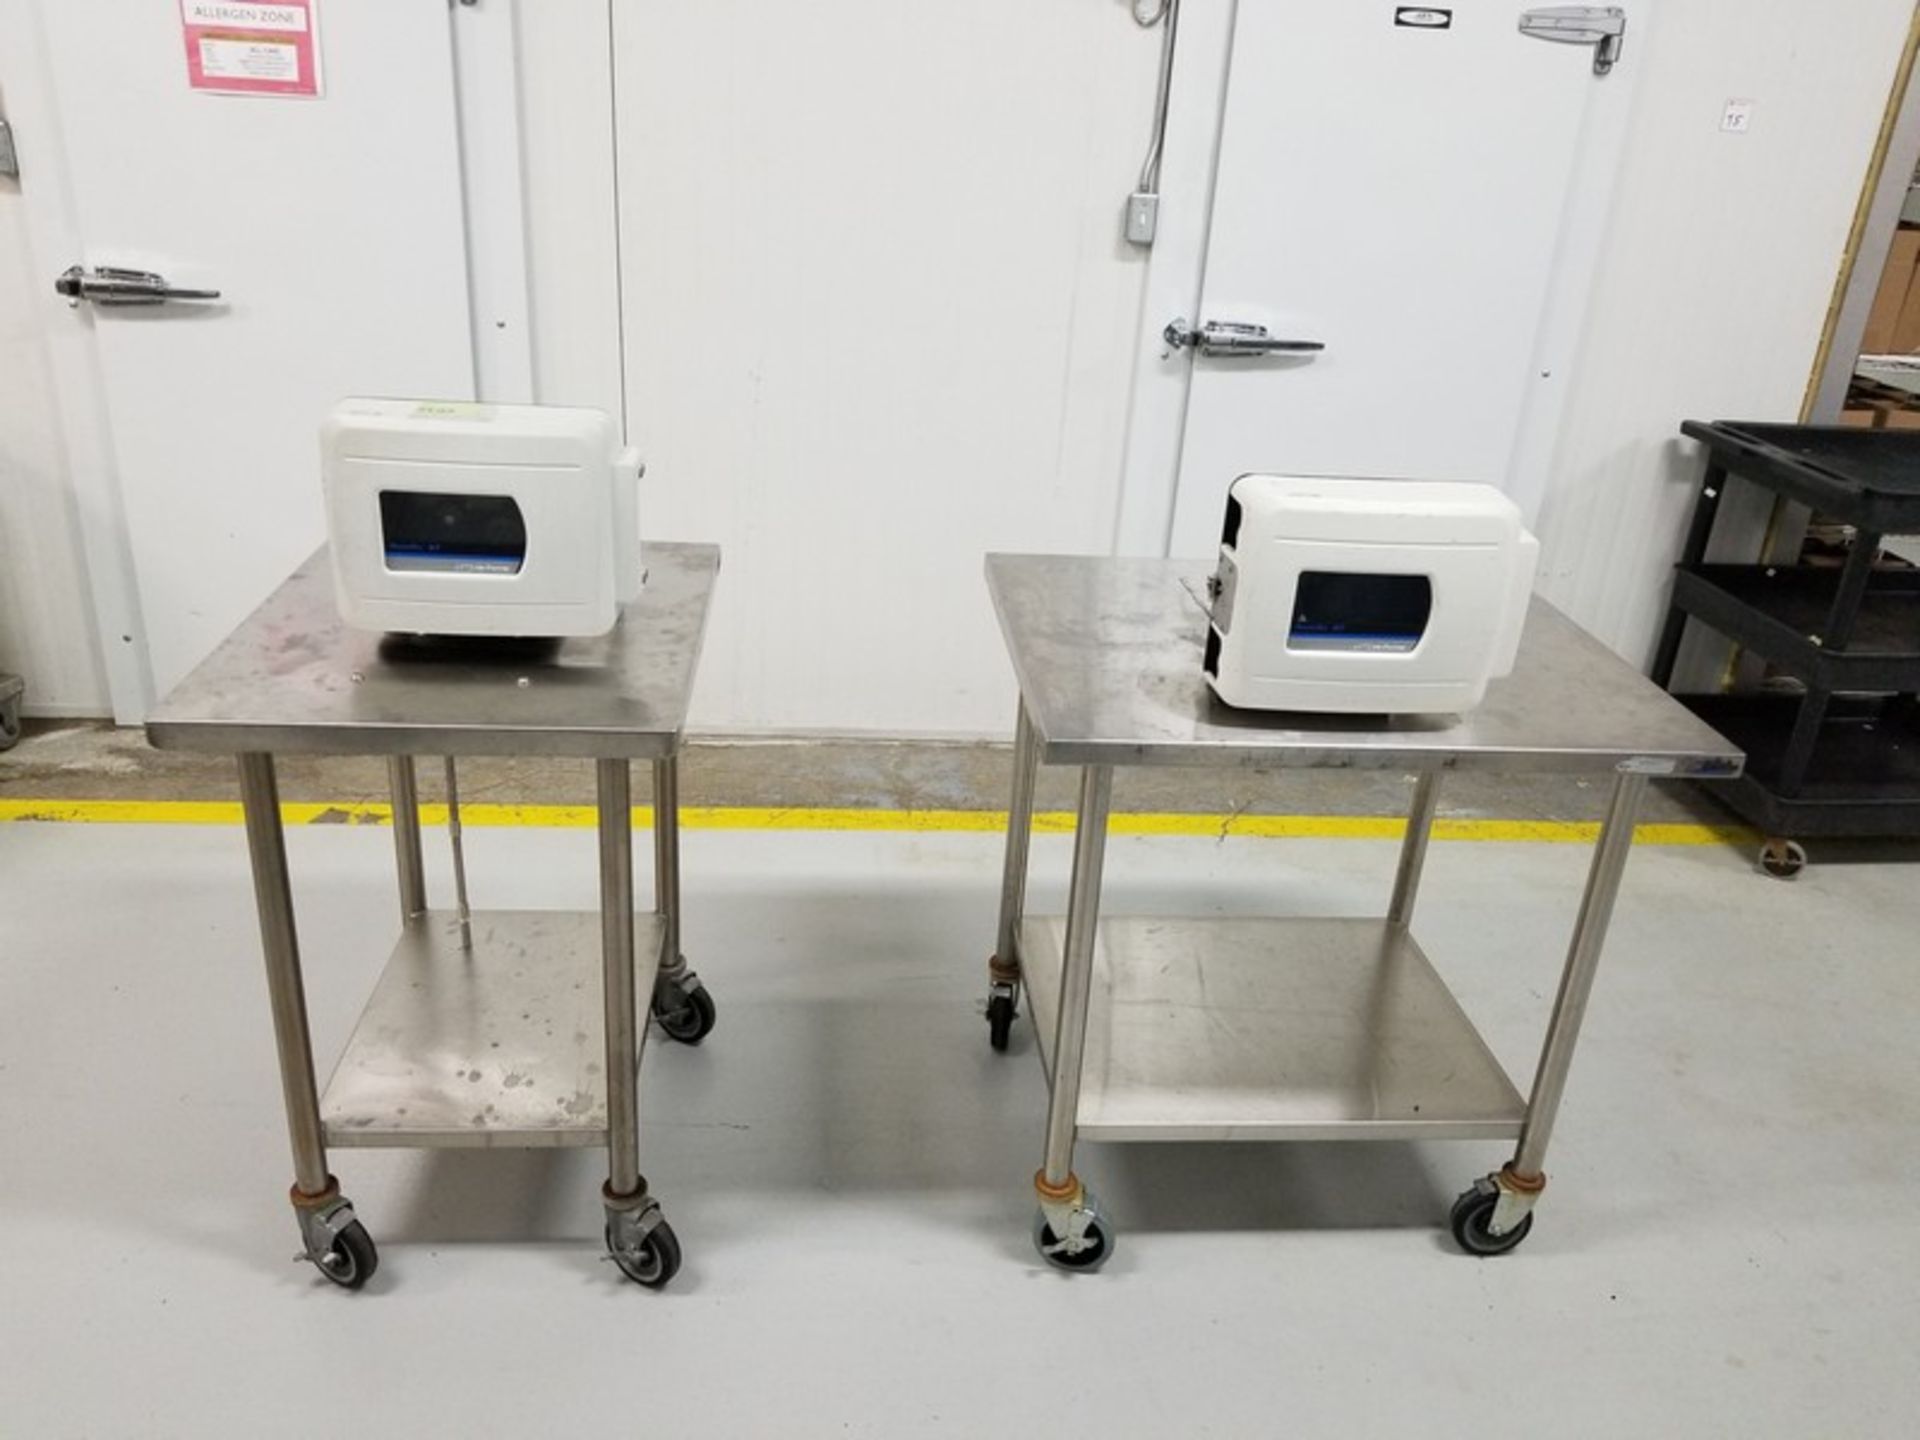 2 Cole-Parmer Masterflex B/T Peristaltic Pumps mounted on Stainless Tables Air operated "as-is" S#